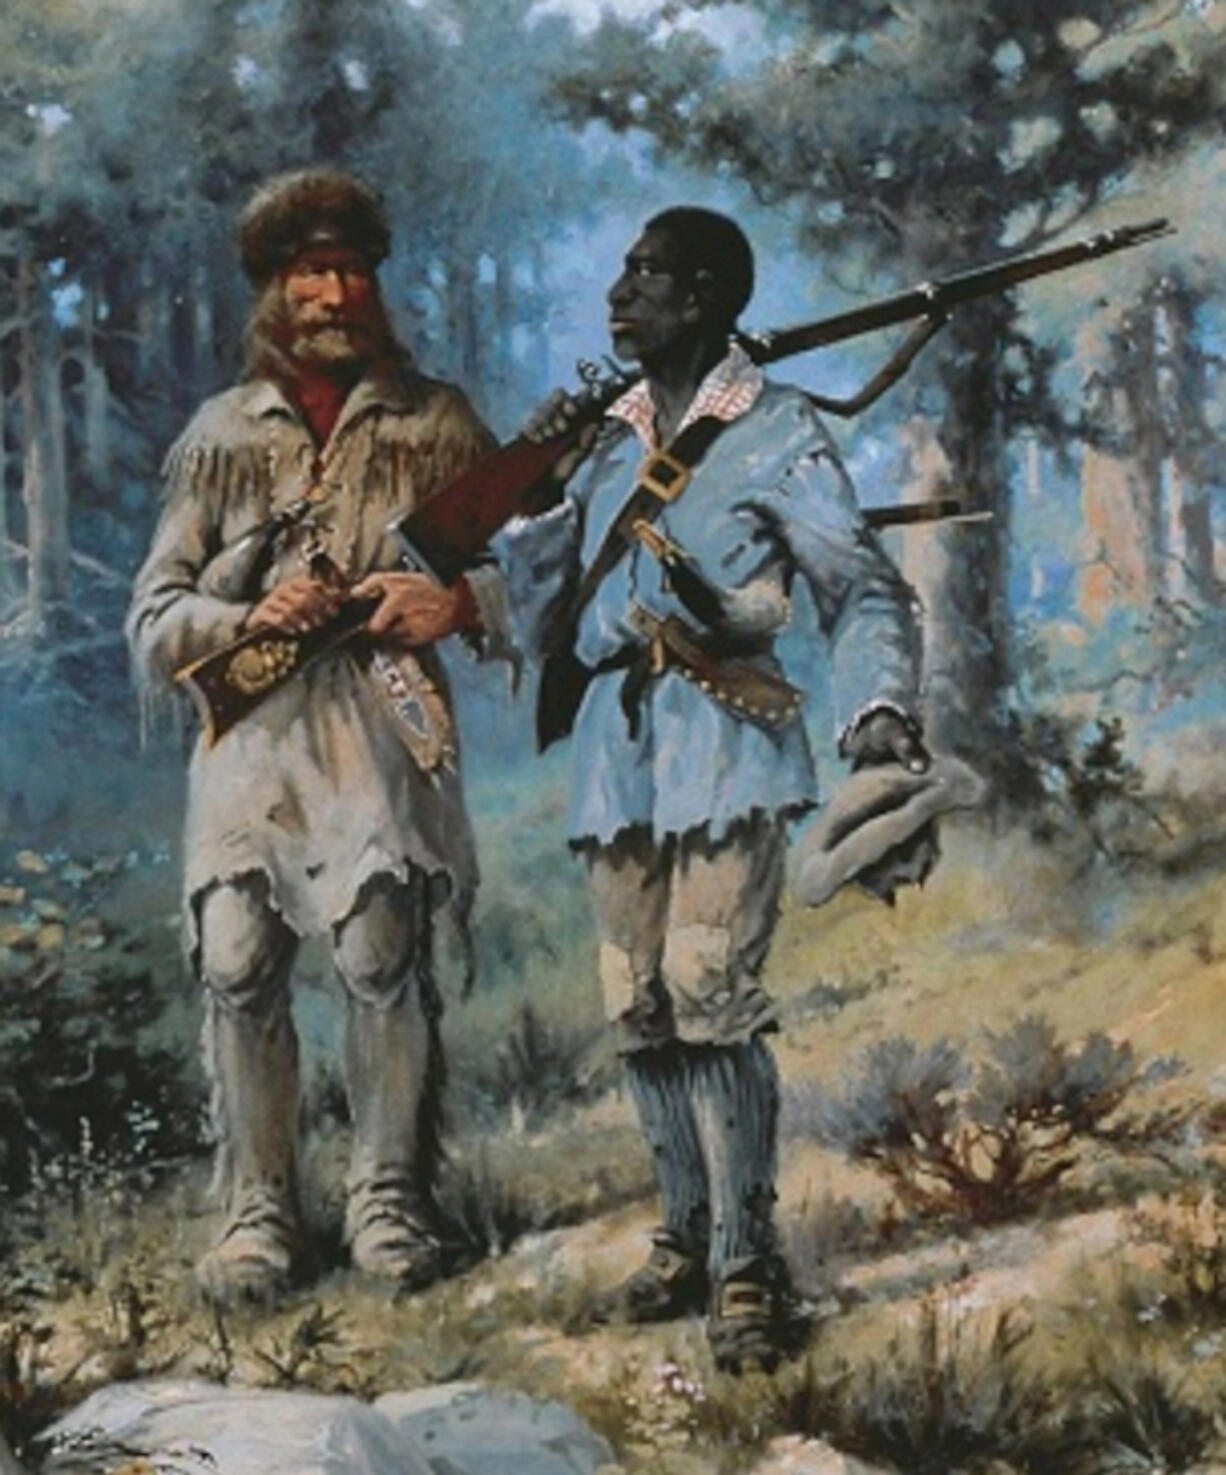 York, a slave in bondage to William Clark during the voyage of the Corps of Discovery, is depicted in this 1912 painting, &ldquo;Lewis and Clark at Three Forks,&rdquo; by E.S. Paxson. No actual image of York is known to exist.